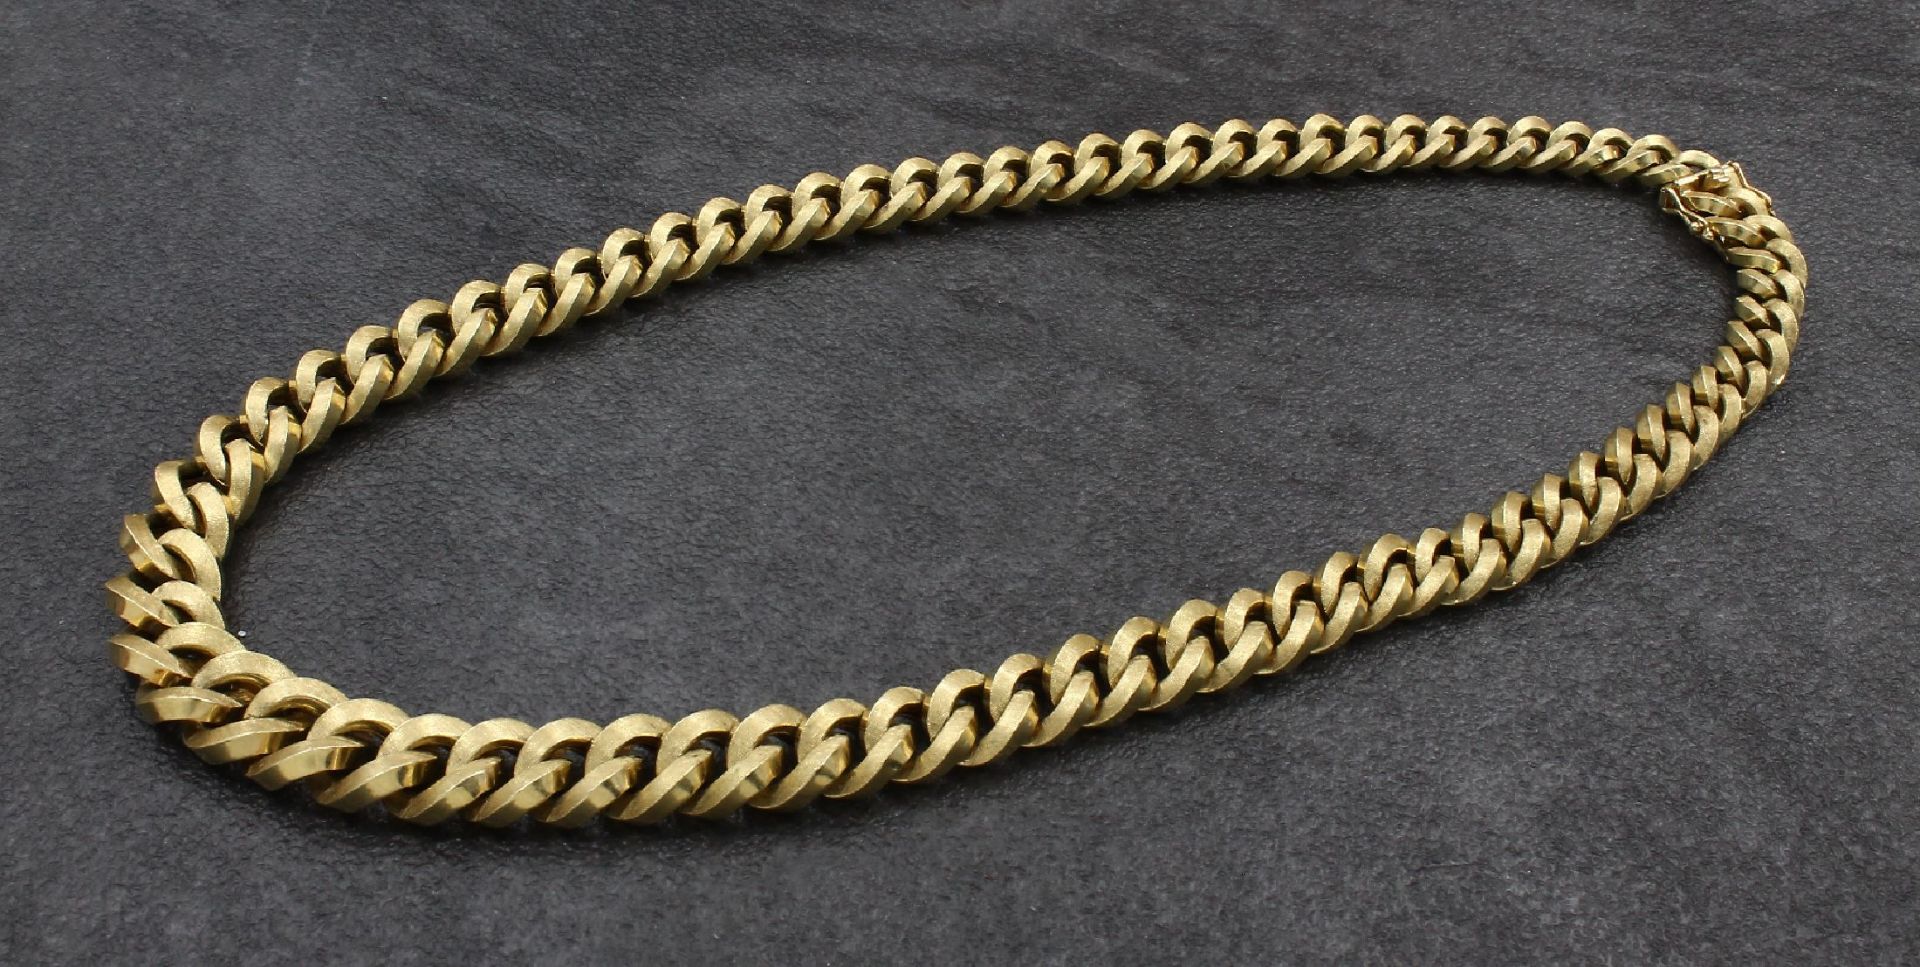 14 kt Gold Collier, GG 585/000, Meistermarke THEODOR - Image 2 of 2